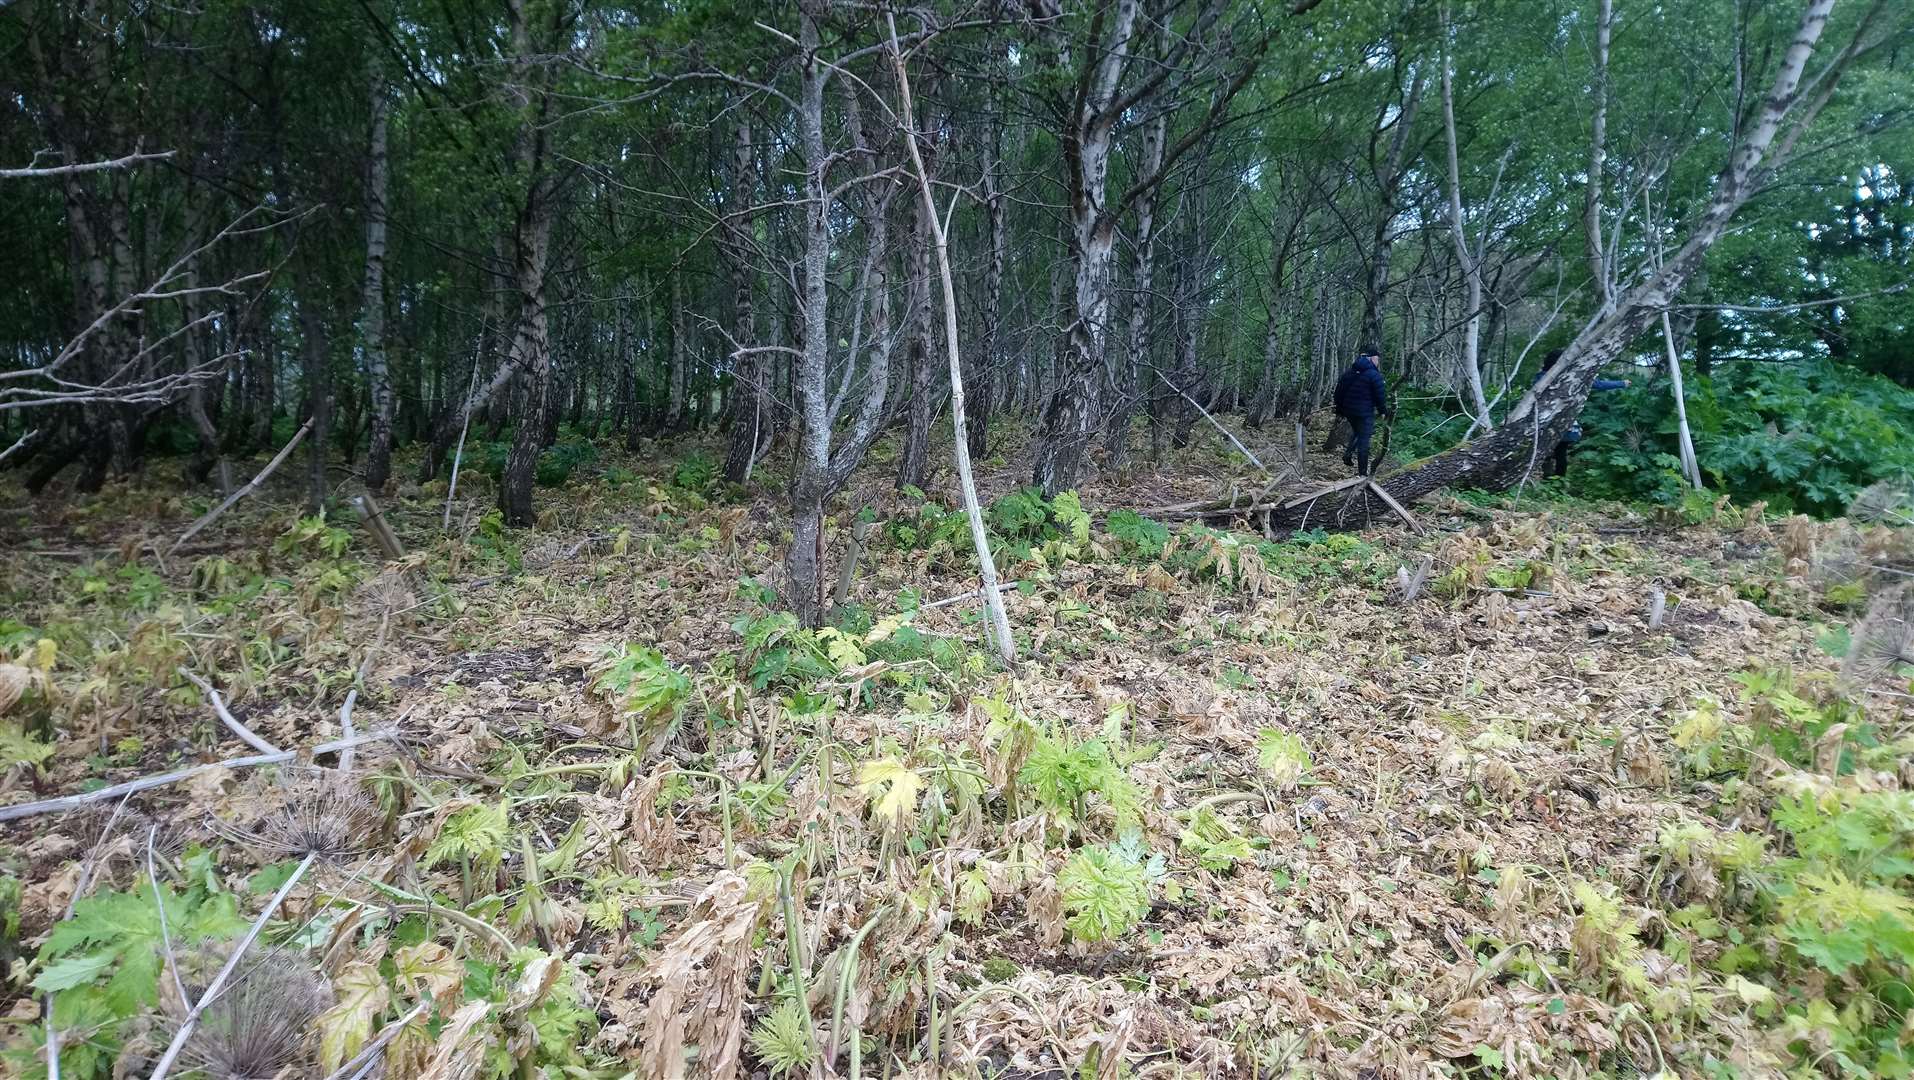 A team of four Wild Things staff members and two volunteers cleared the section of woodland over several days with funding from EB Scotland.